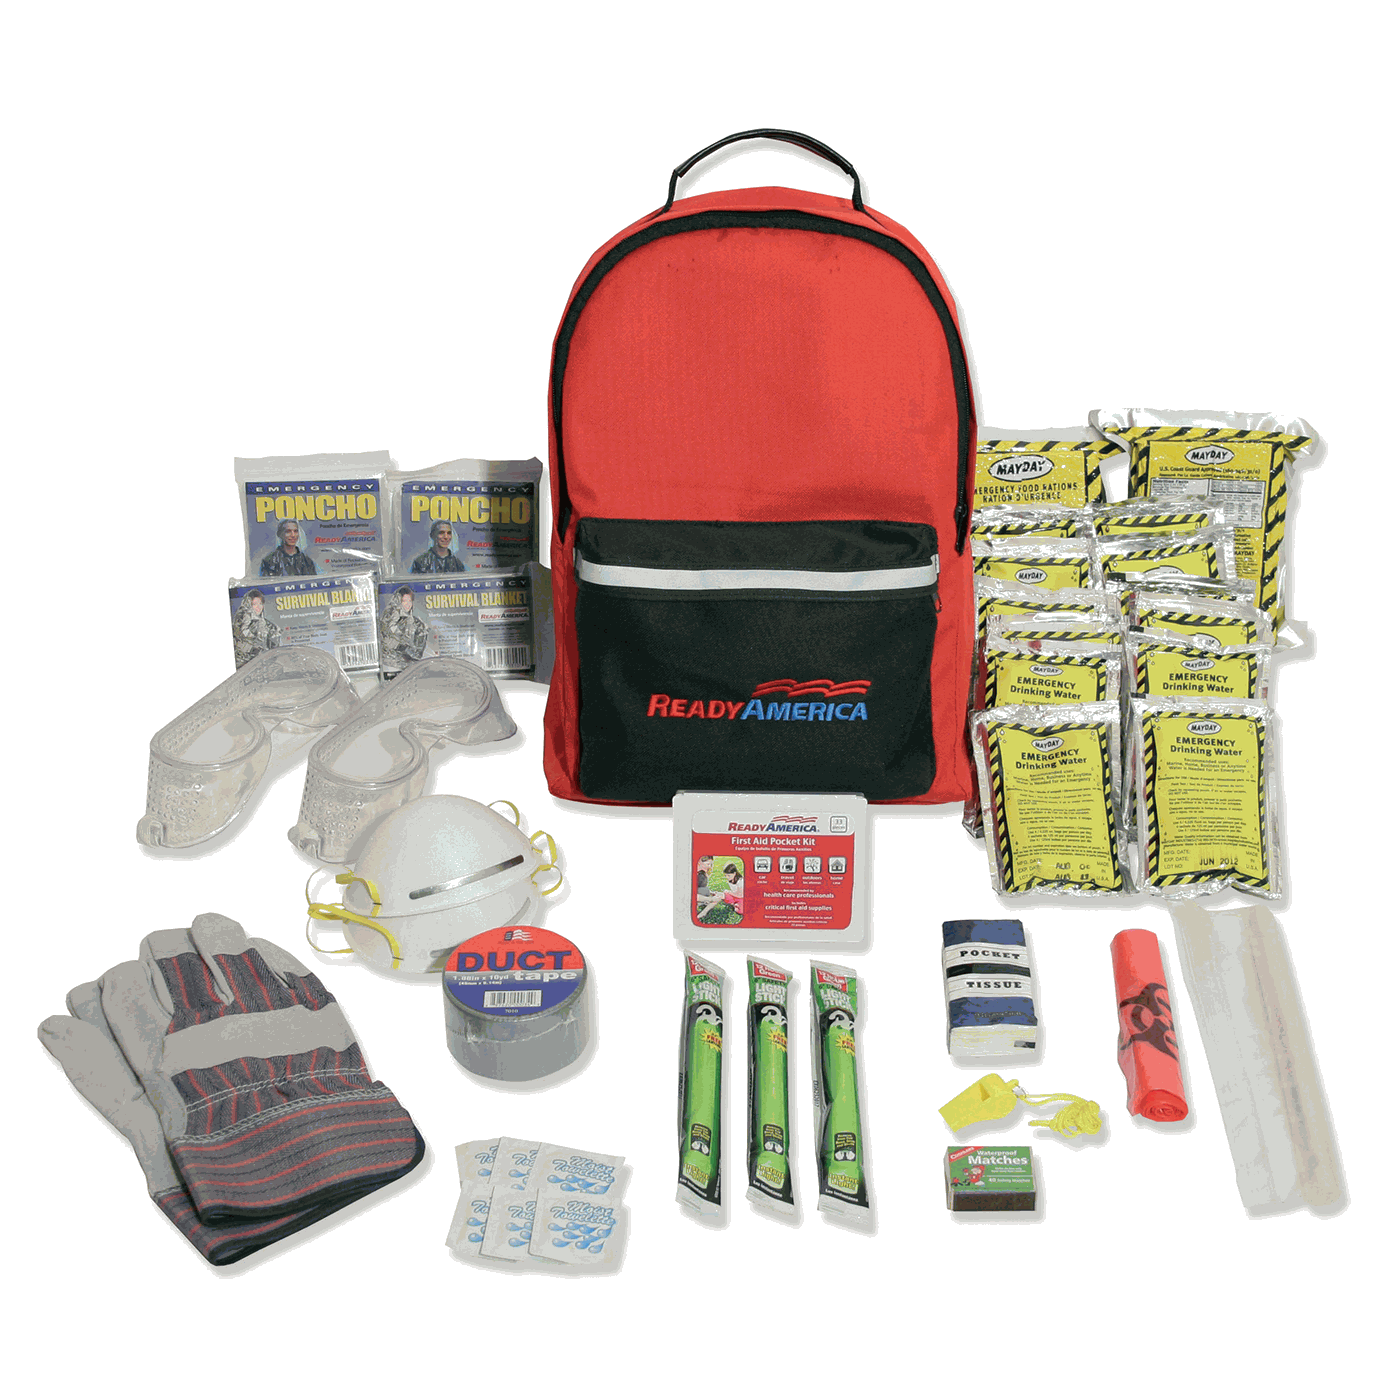 https://www.quakehold.com/wp-content/uploads/2021/06/products-grab-n-go-3-day-hurricane-emergency-kit-7.gif.gif